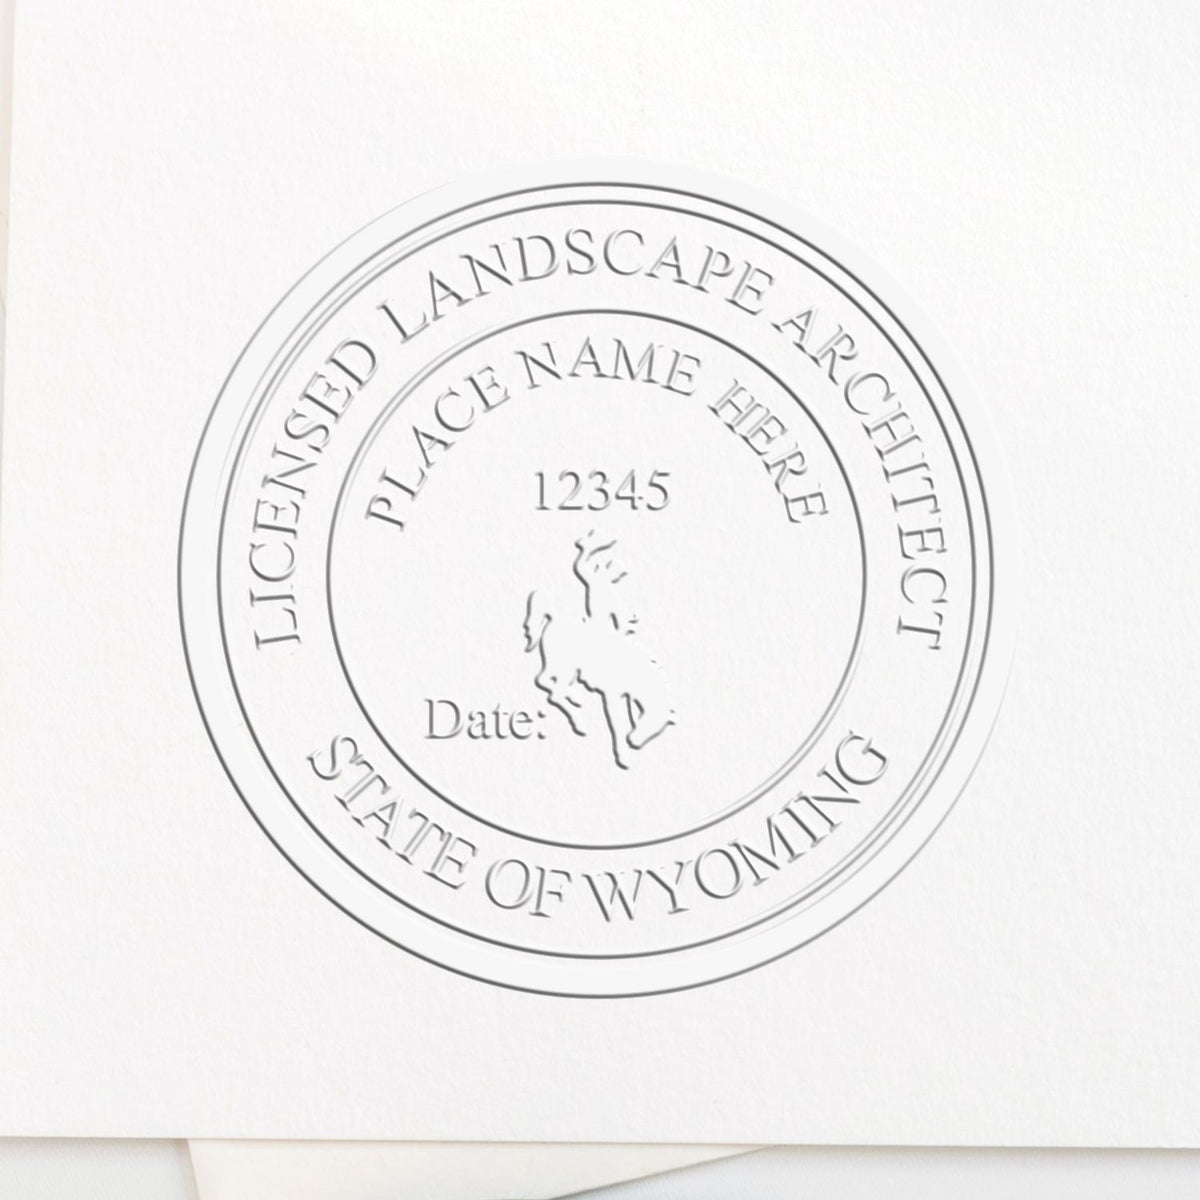 A stamped imprint of the Gift Wyoming Landscape Architect Seal in this stylish lifestyle photo, setting the tone for a unique and personalized product.